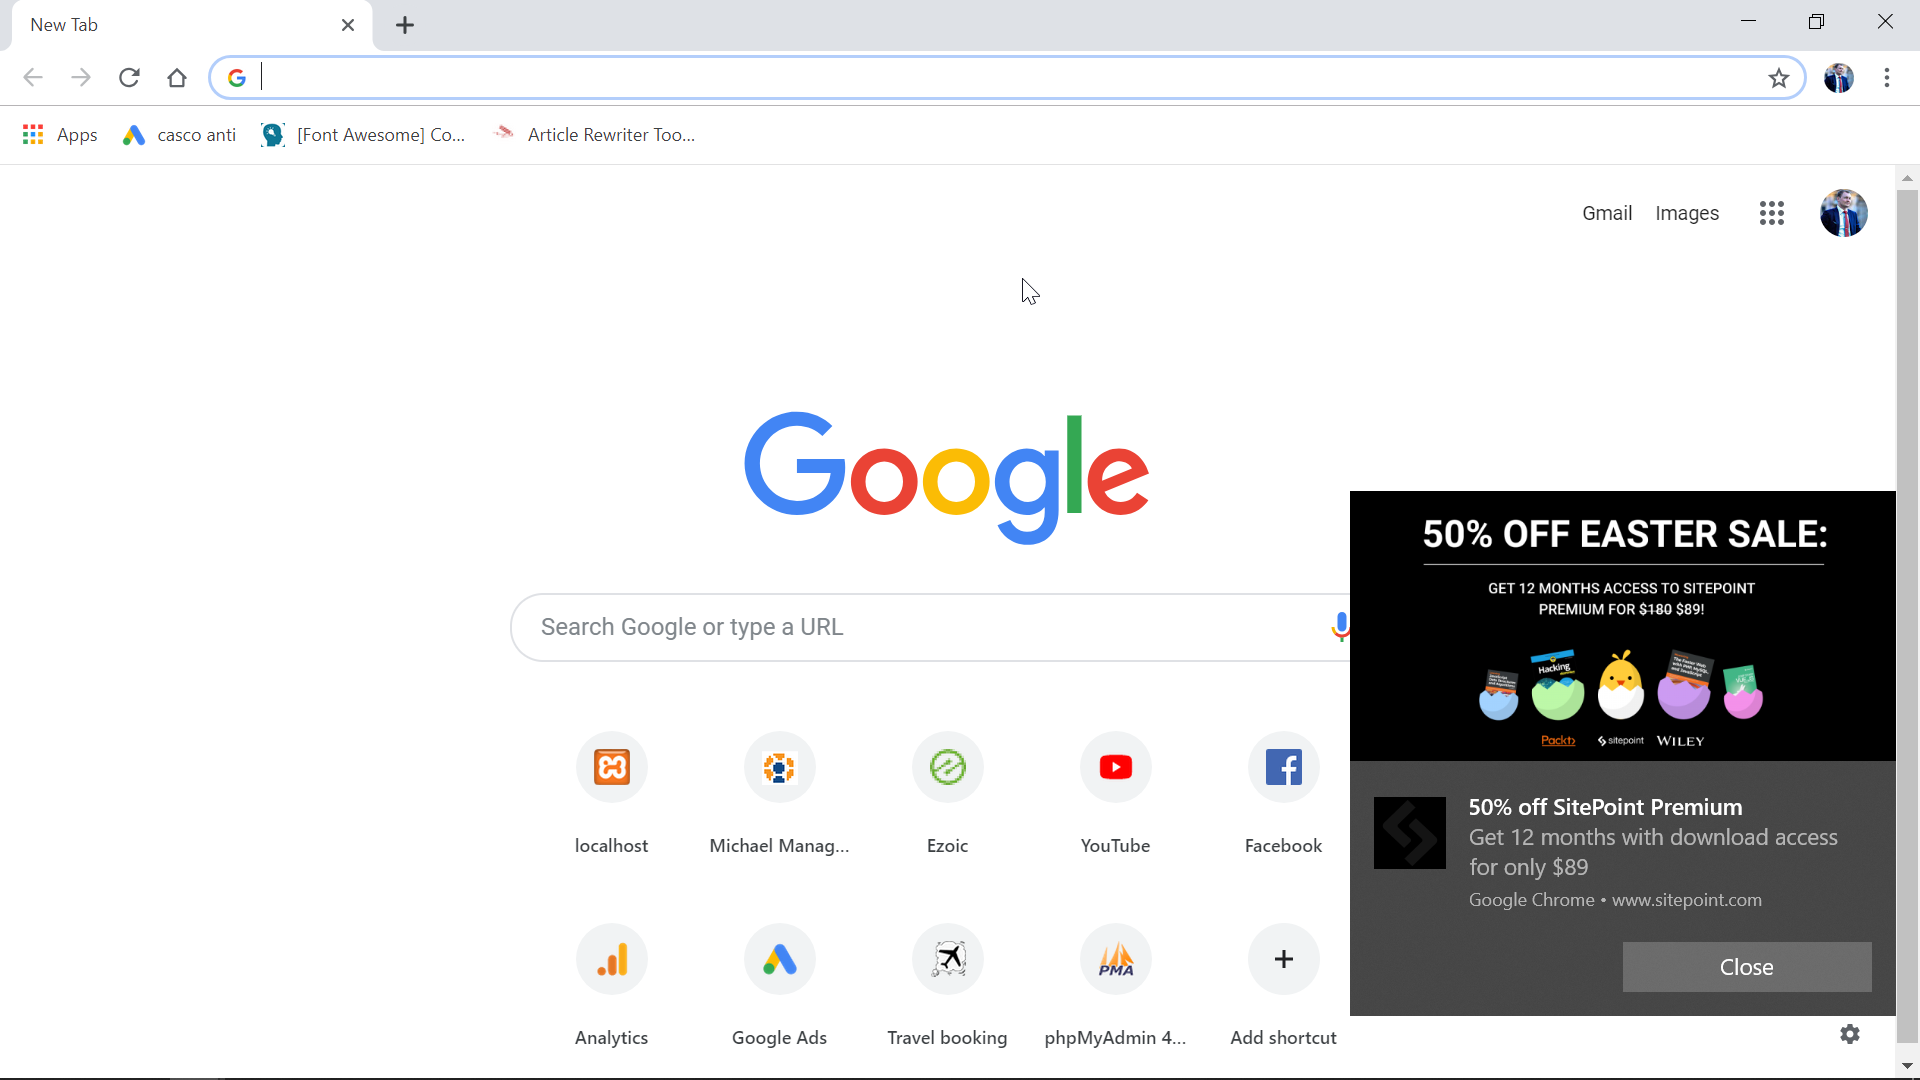 How to turn off Chrome notifications on Windows10?